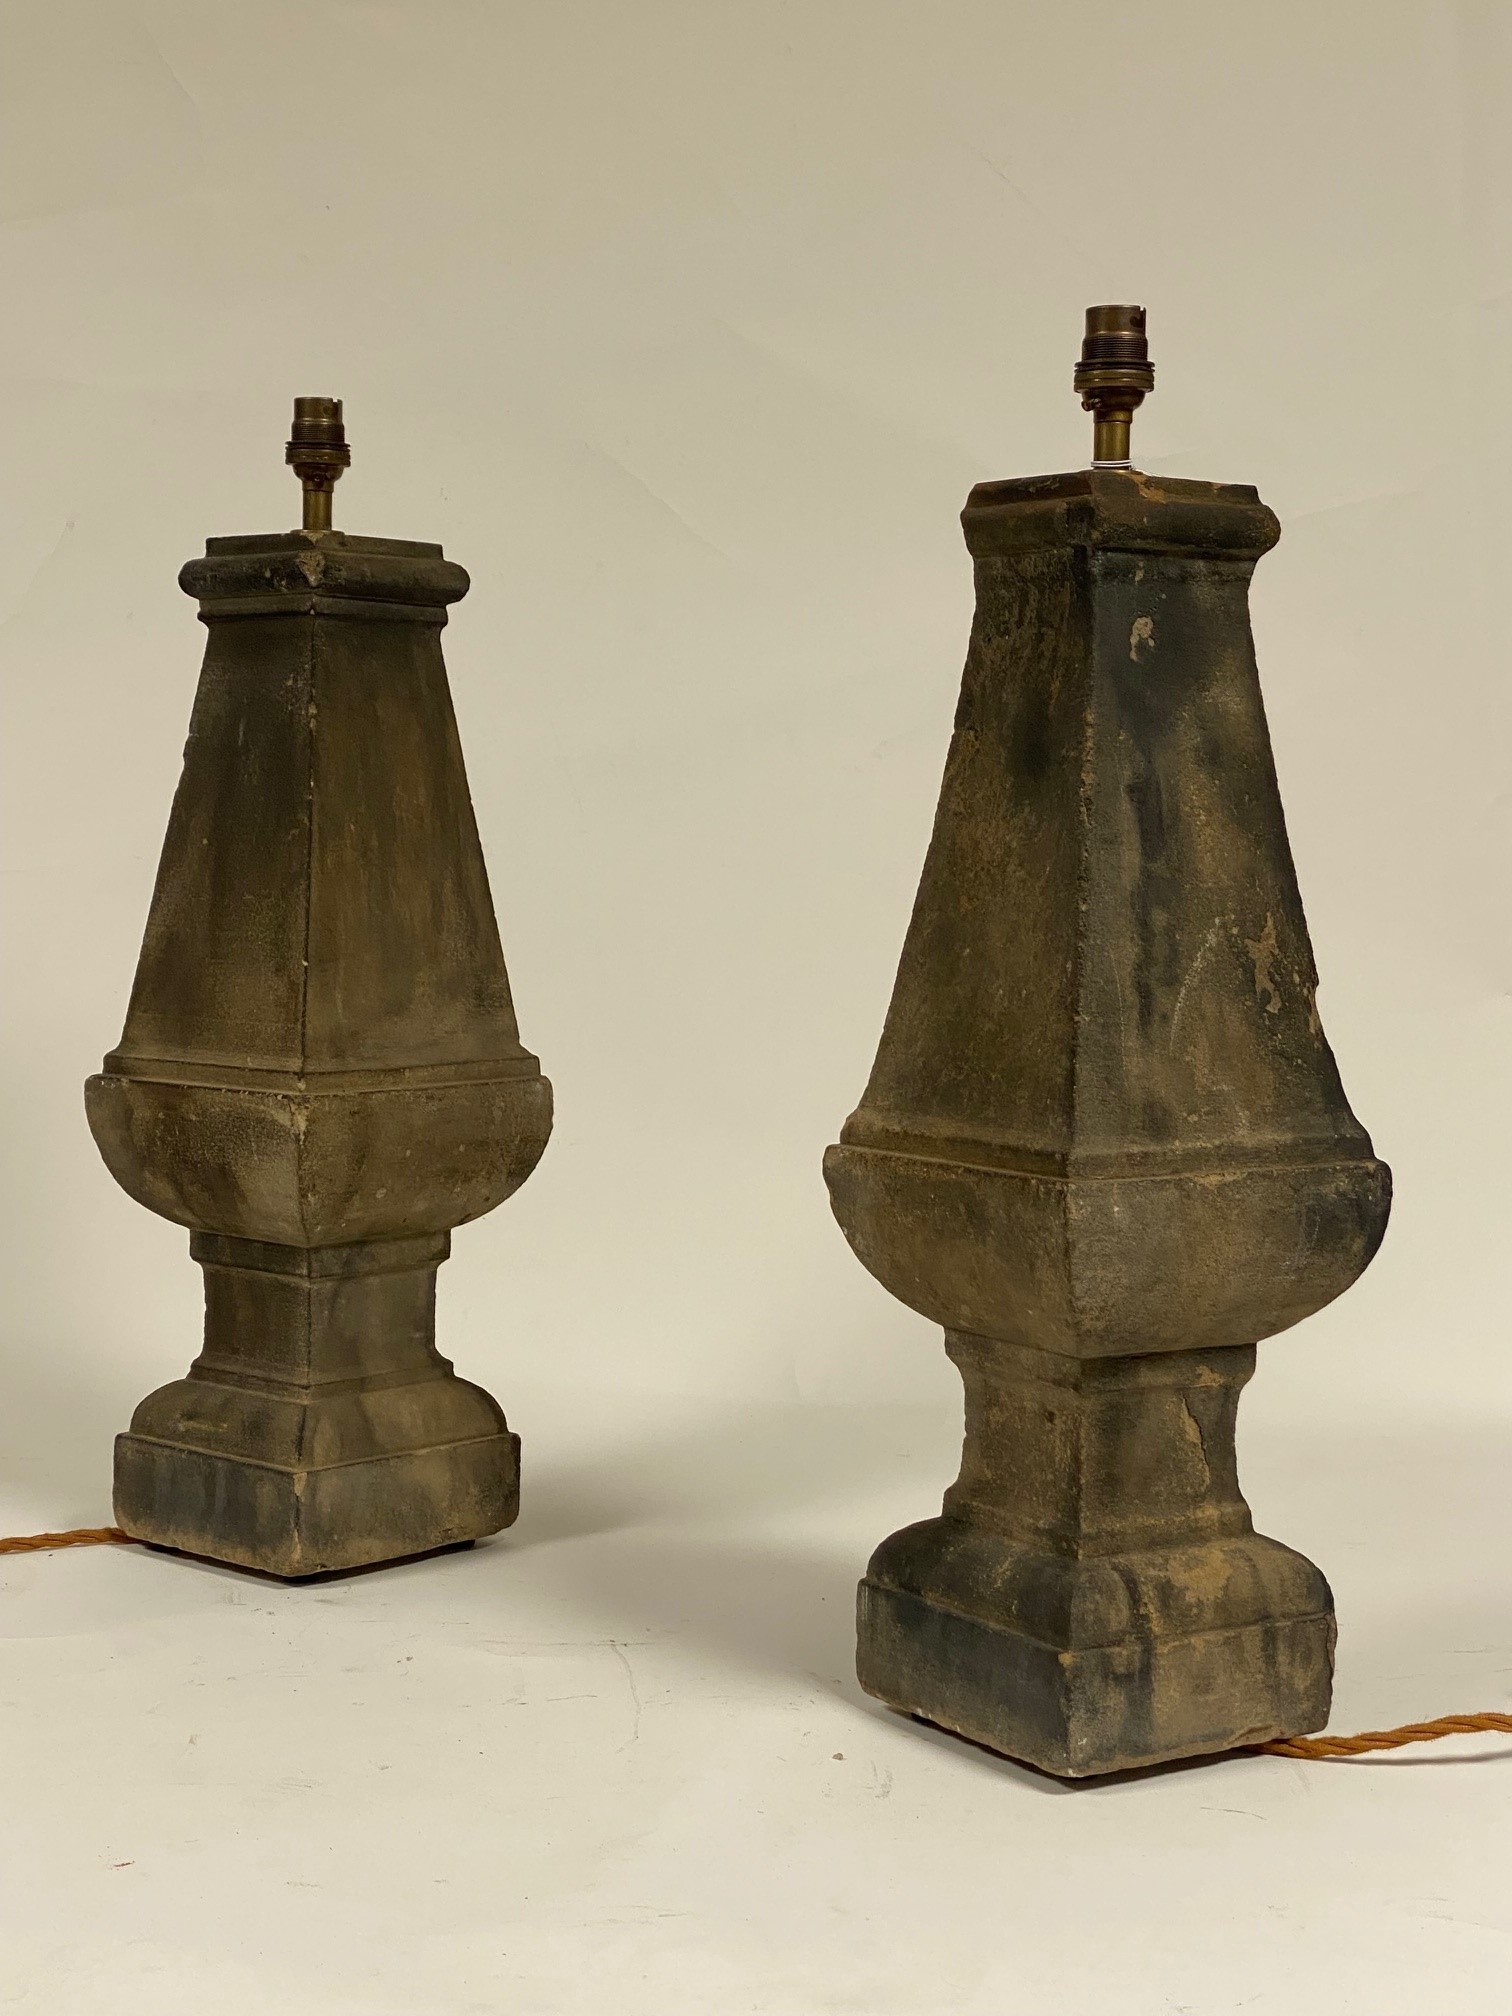 A pair of 19th century carved stone balustrades, of faceted baluster form, converted to table lamps.